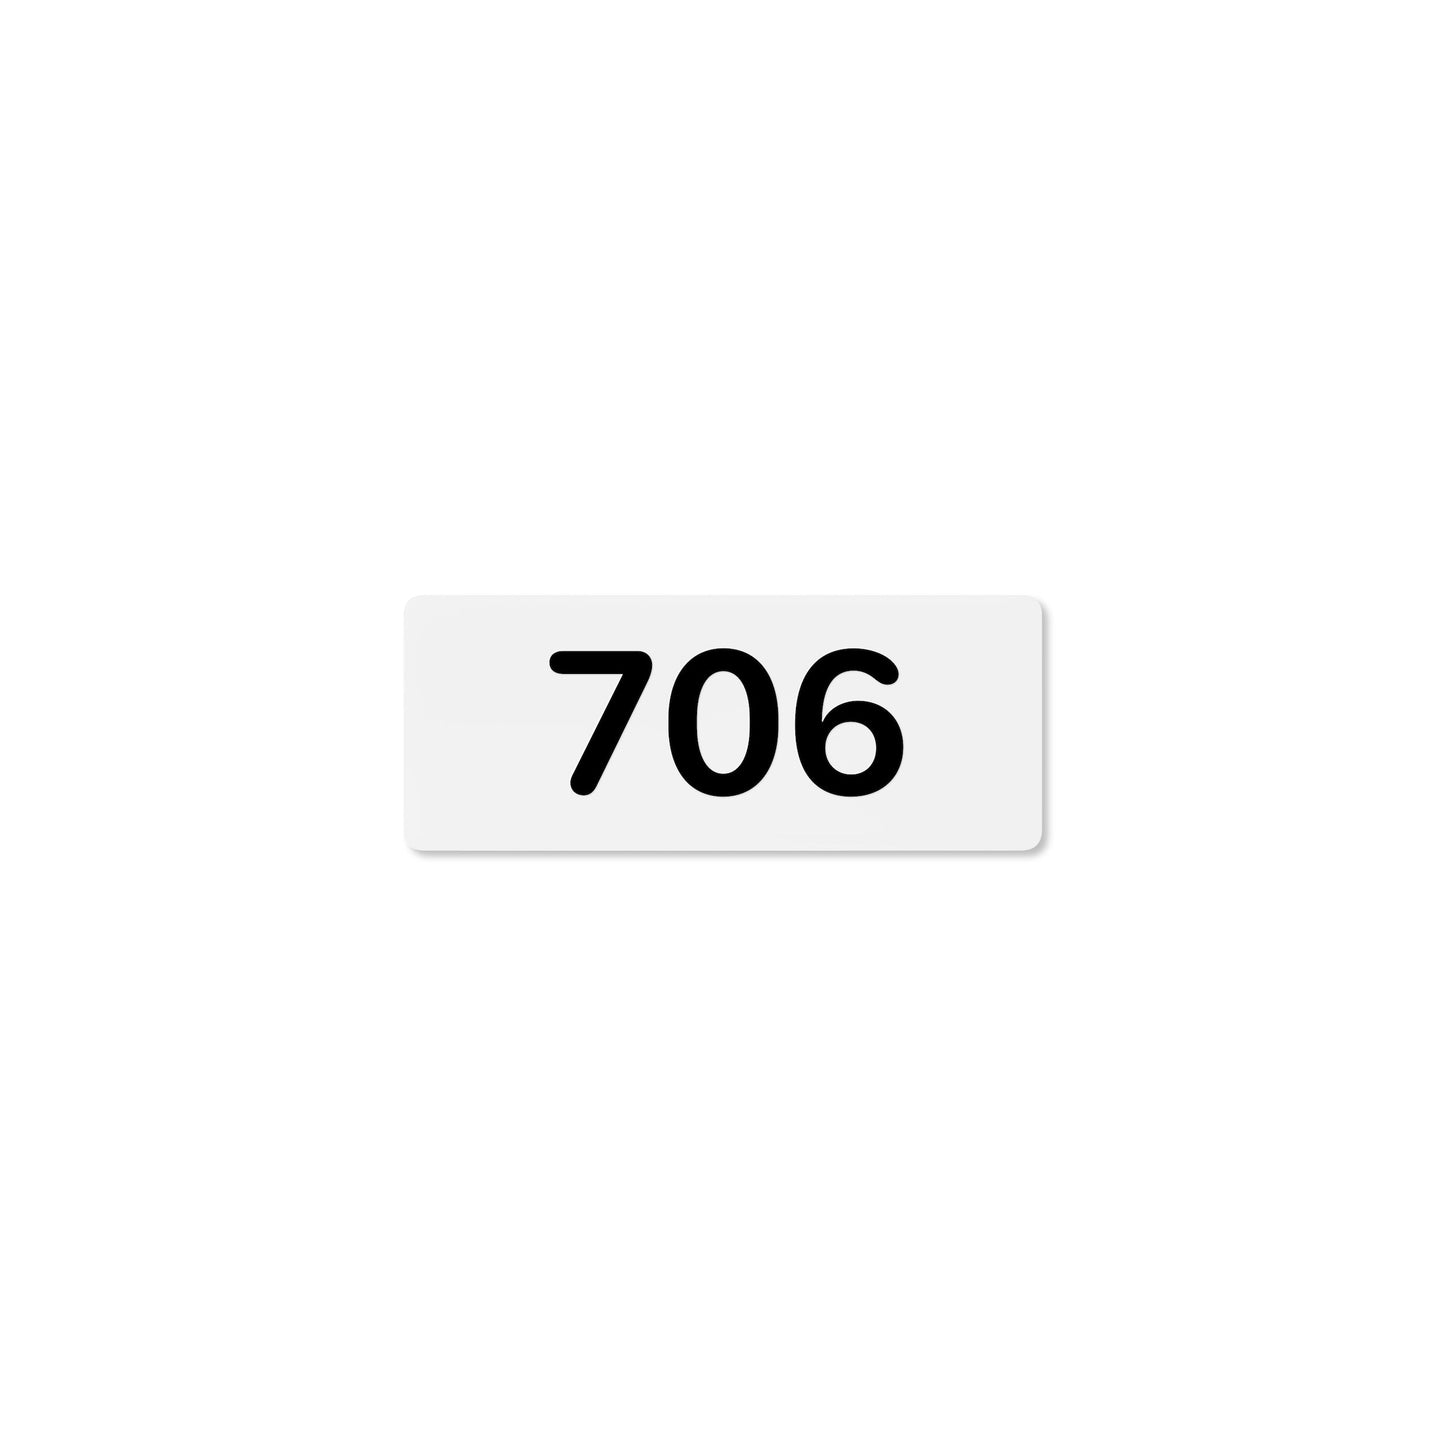 Numeral 706